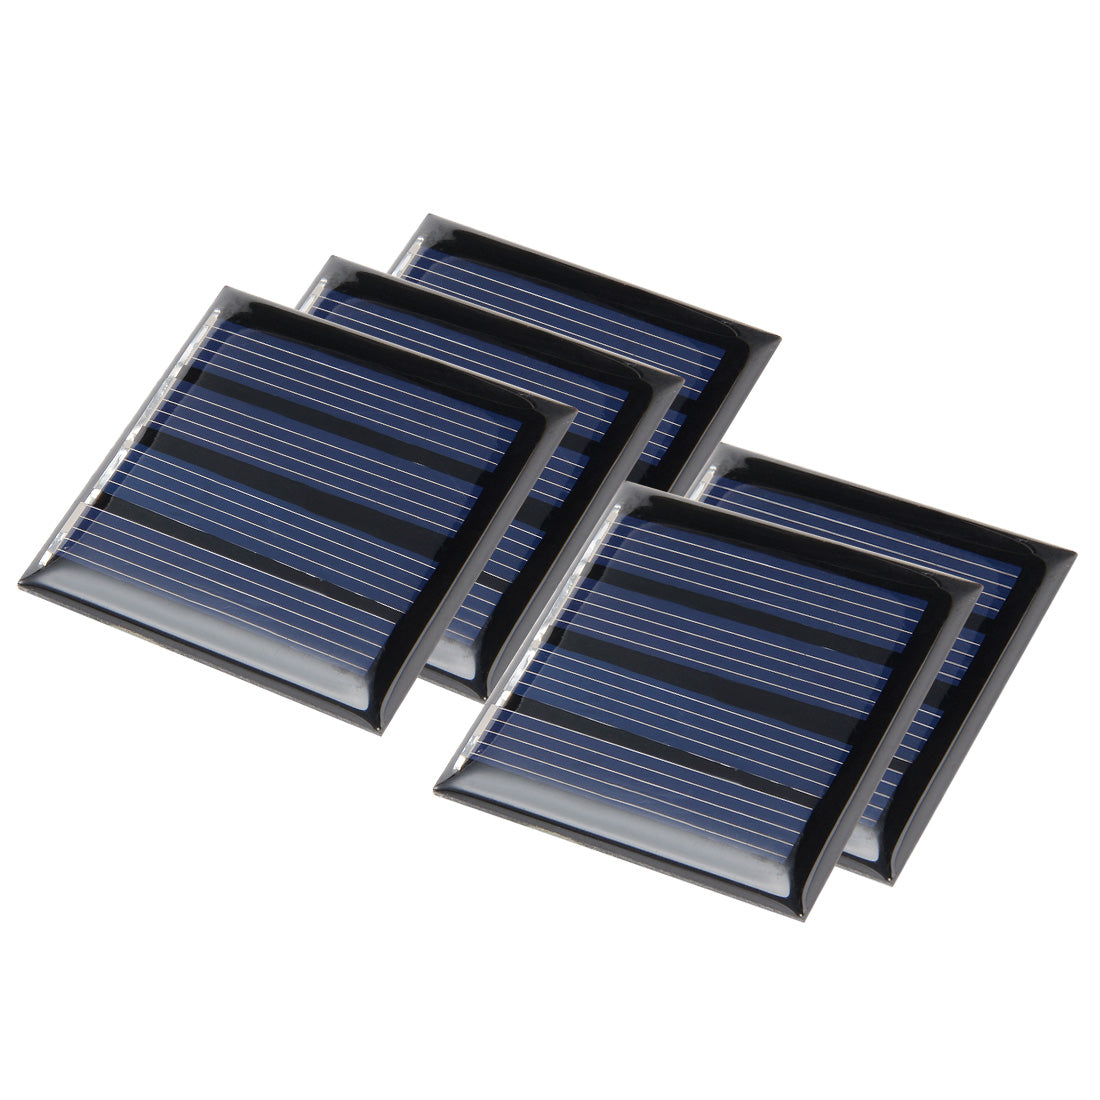 uxcell Uxcell 5Pcs 2V 50mA Poly Mini Solar Cell Panel Module DIY for Phone Light Toys Charger 45mm x 45mm